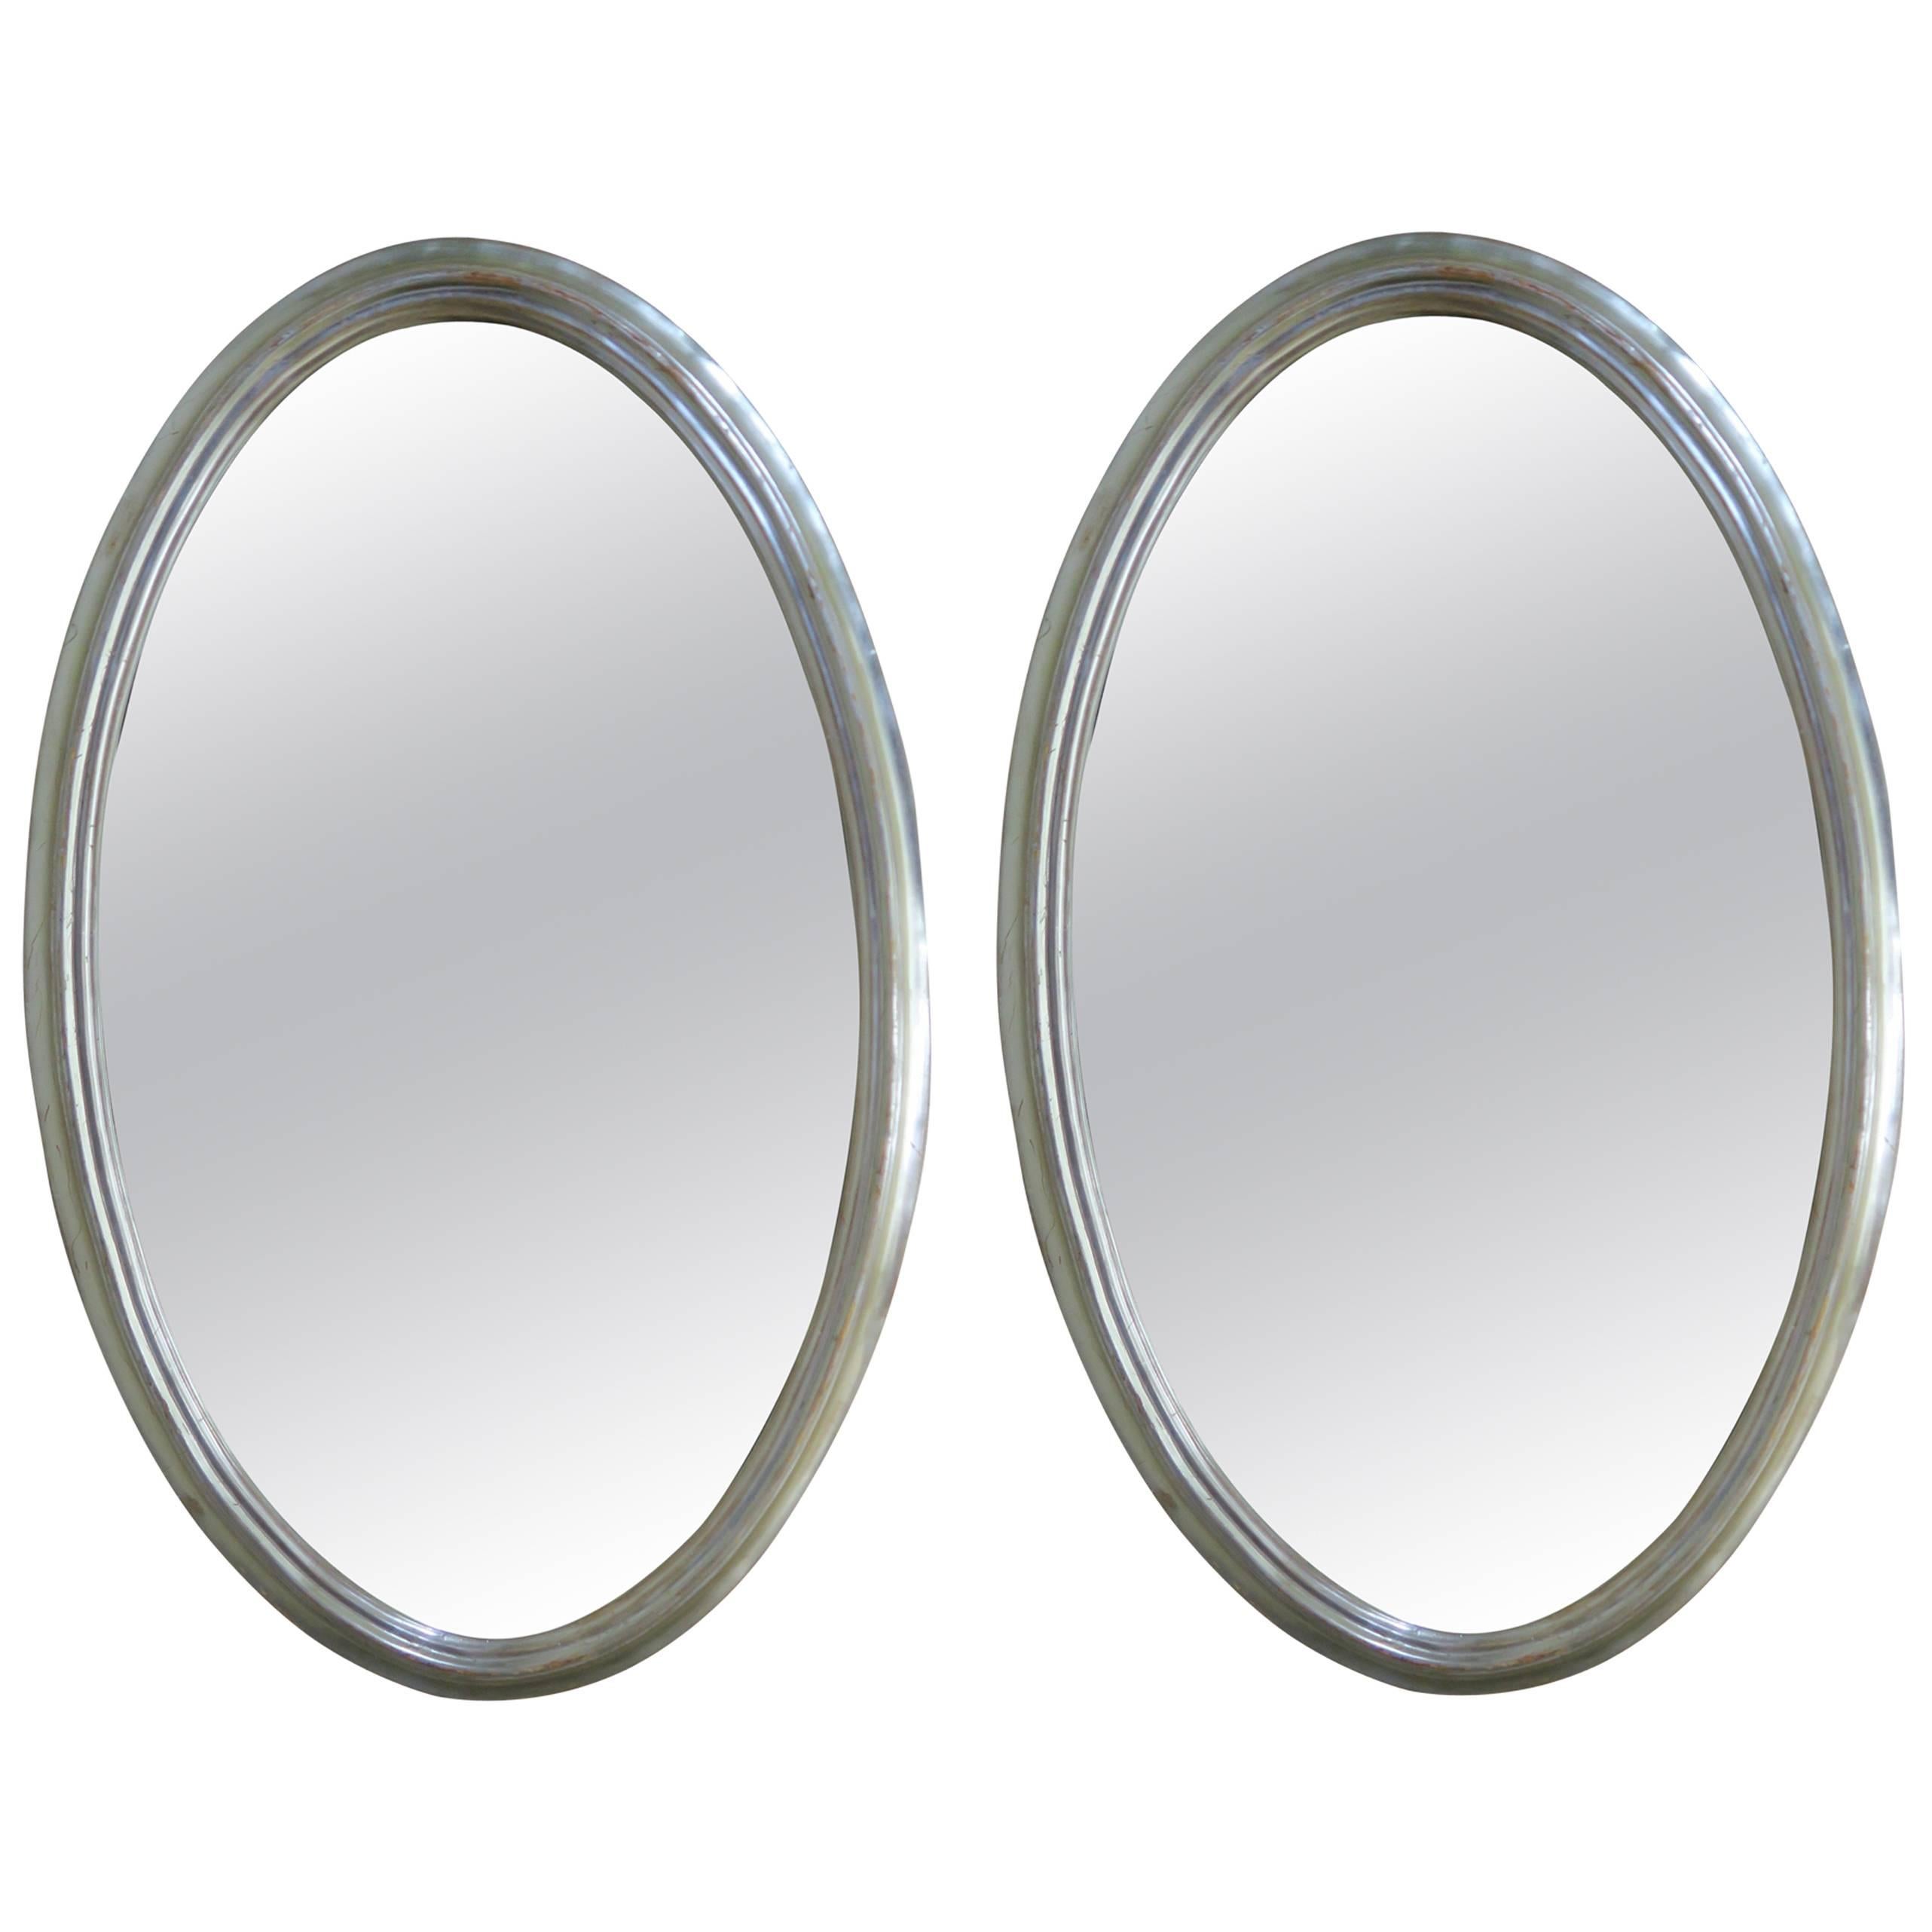 Pair of Mid-Century Oval Silver Mirrors